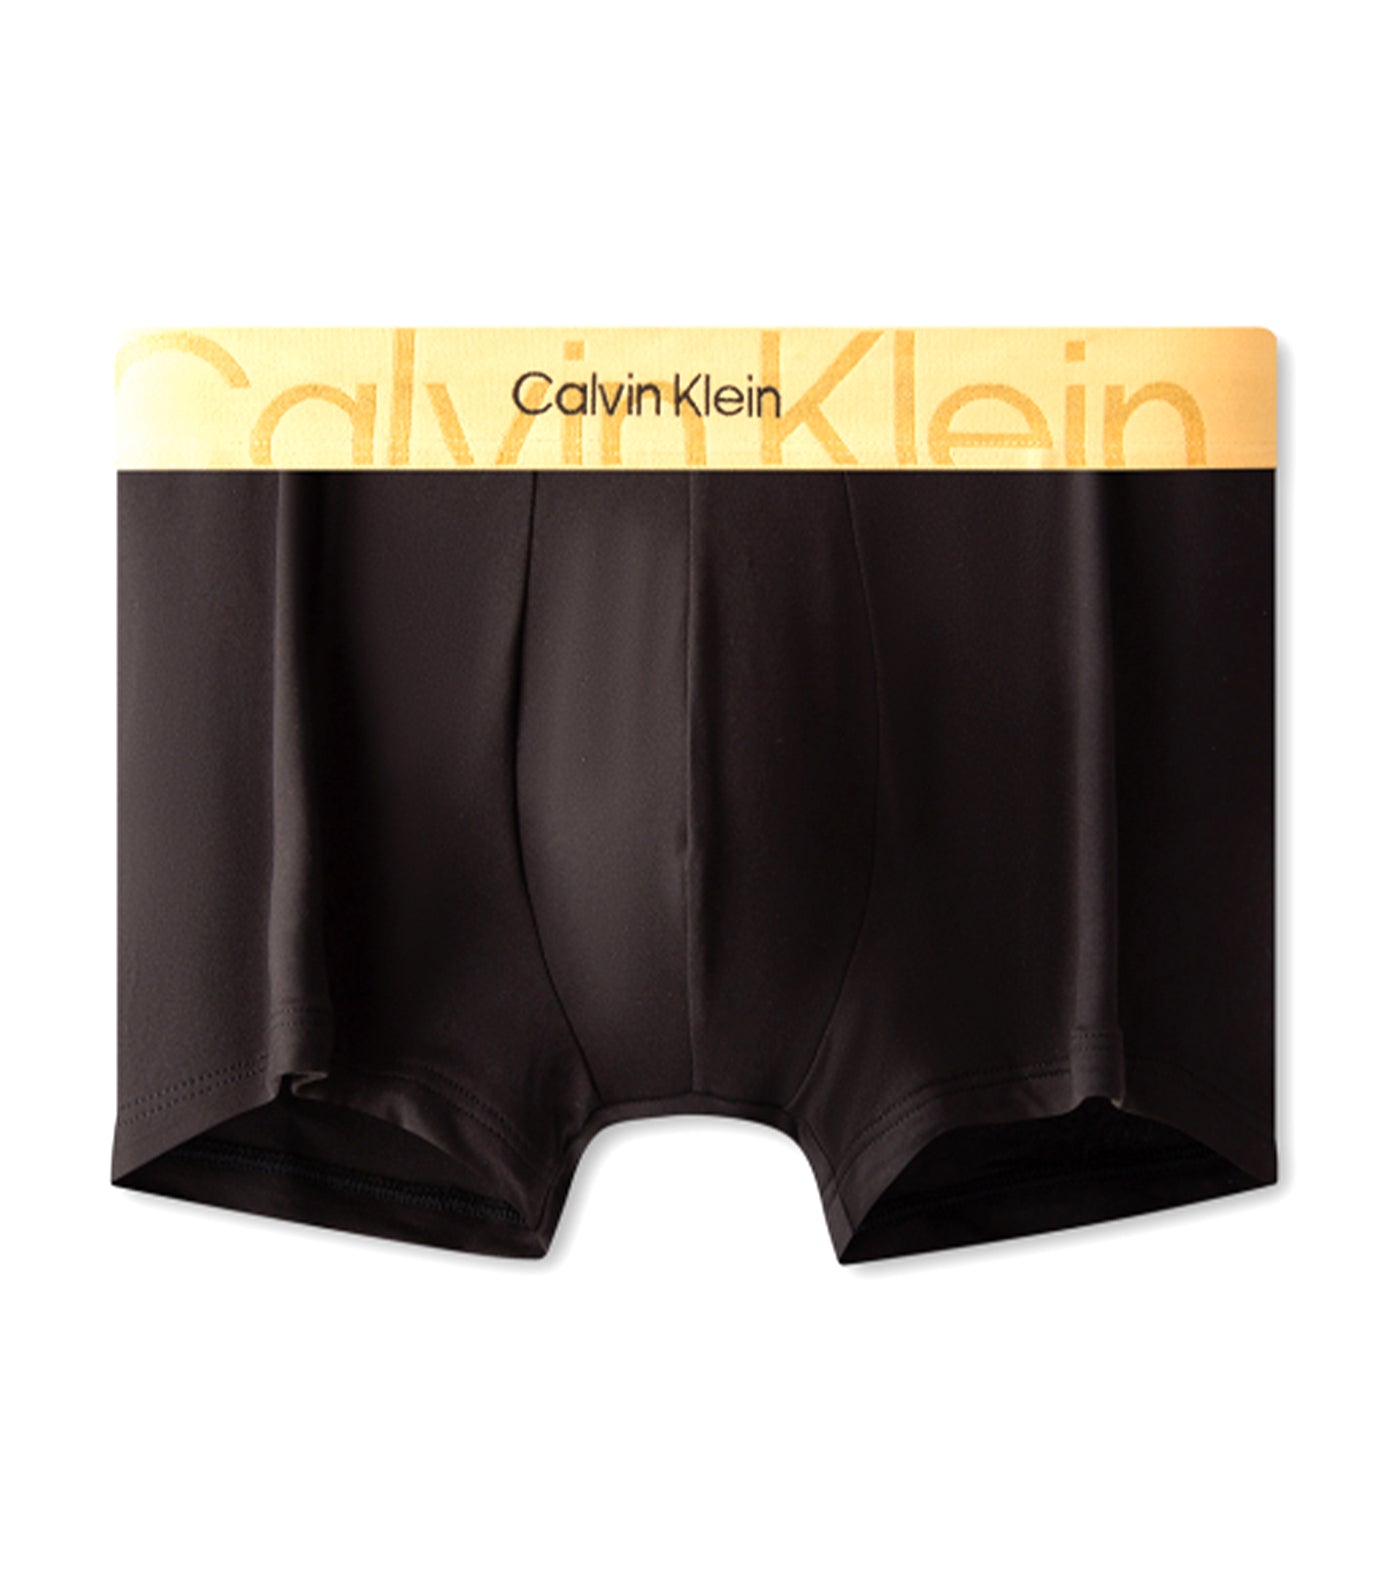 Embossed Icon Holiday Micro Low Rise Trunk Black with Gold-Tone Waistband